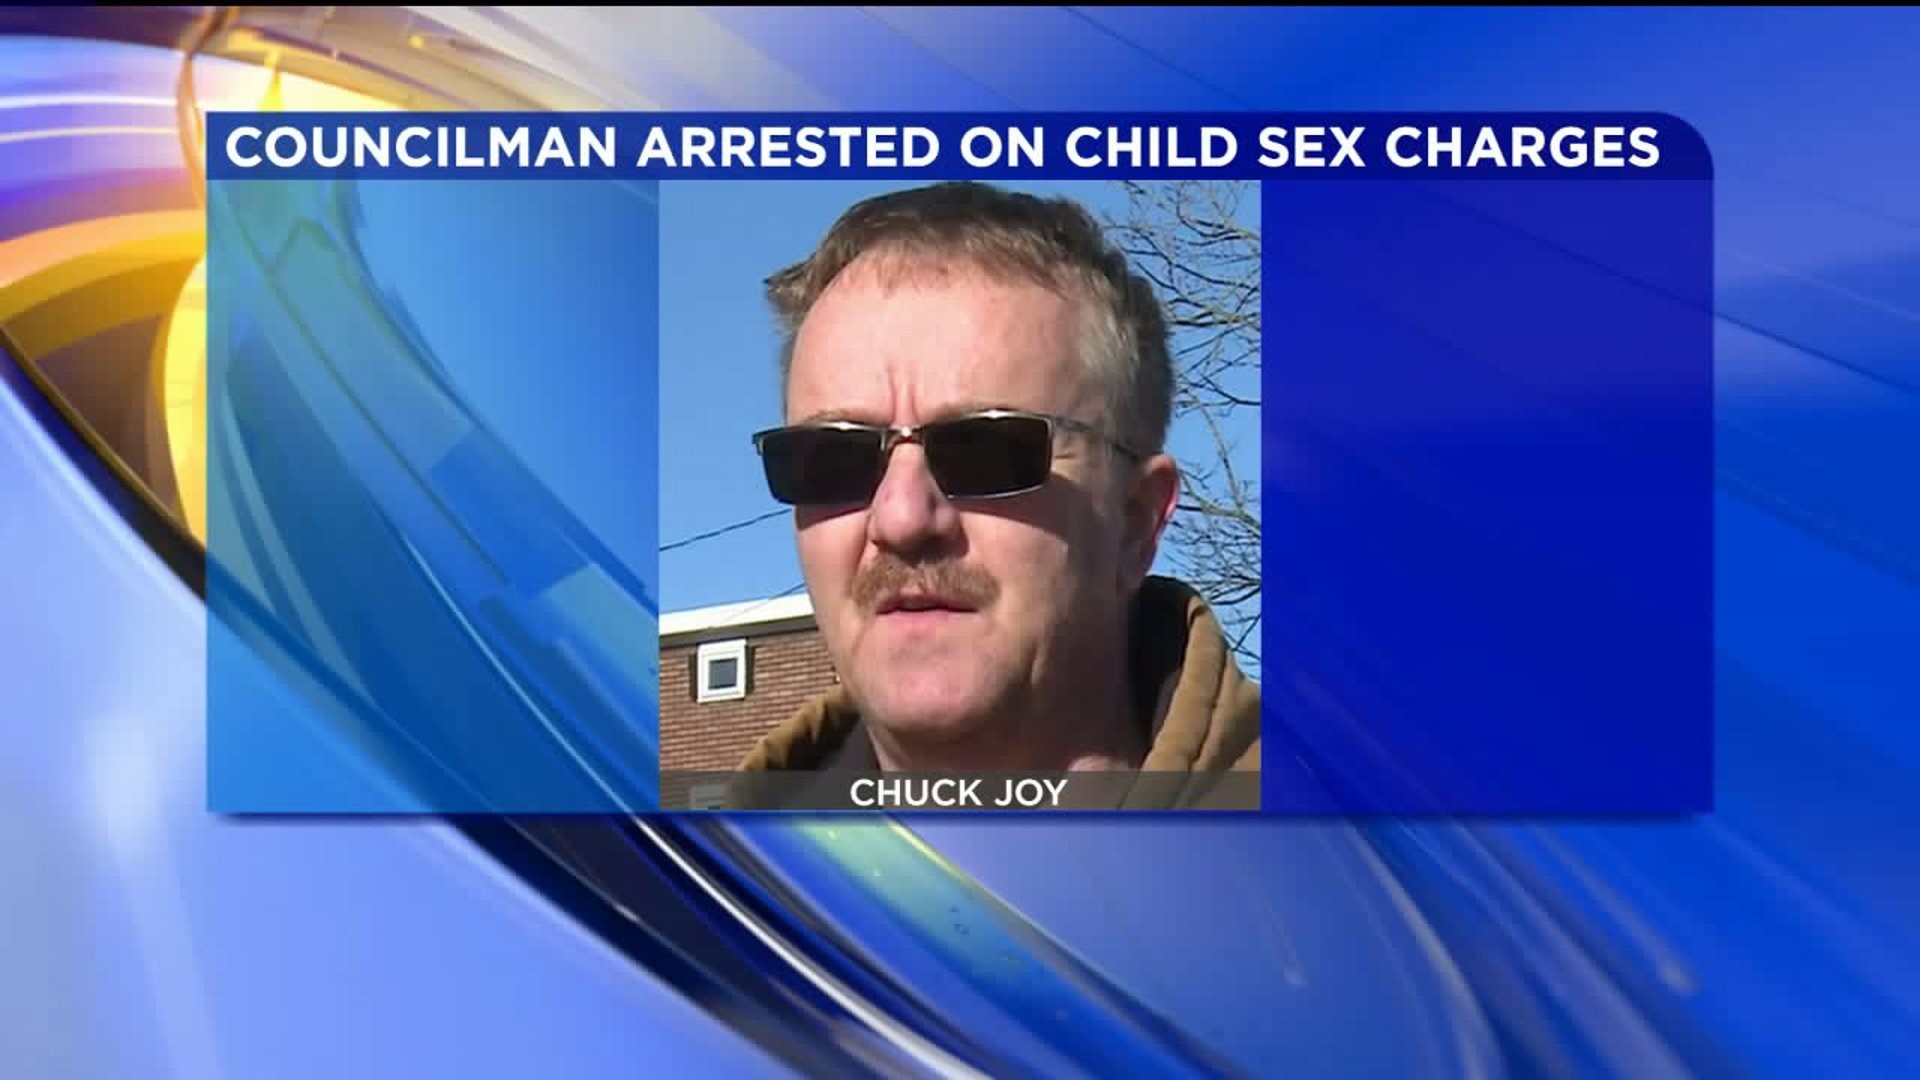 Port Carbon Borough Councilman Locked Up on Child Sex Charges